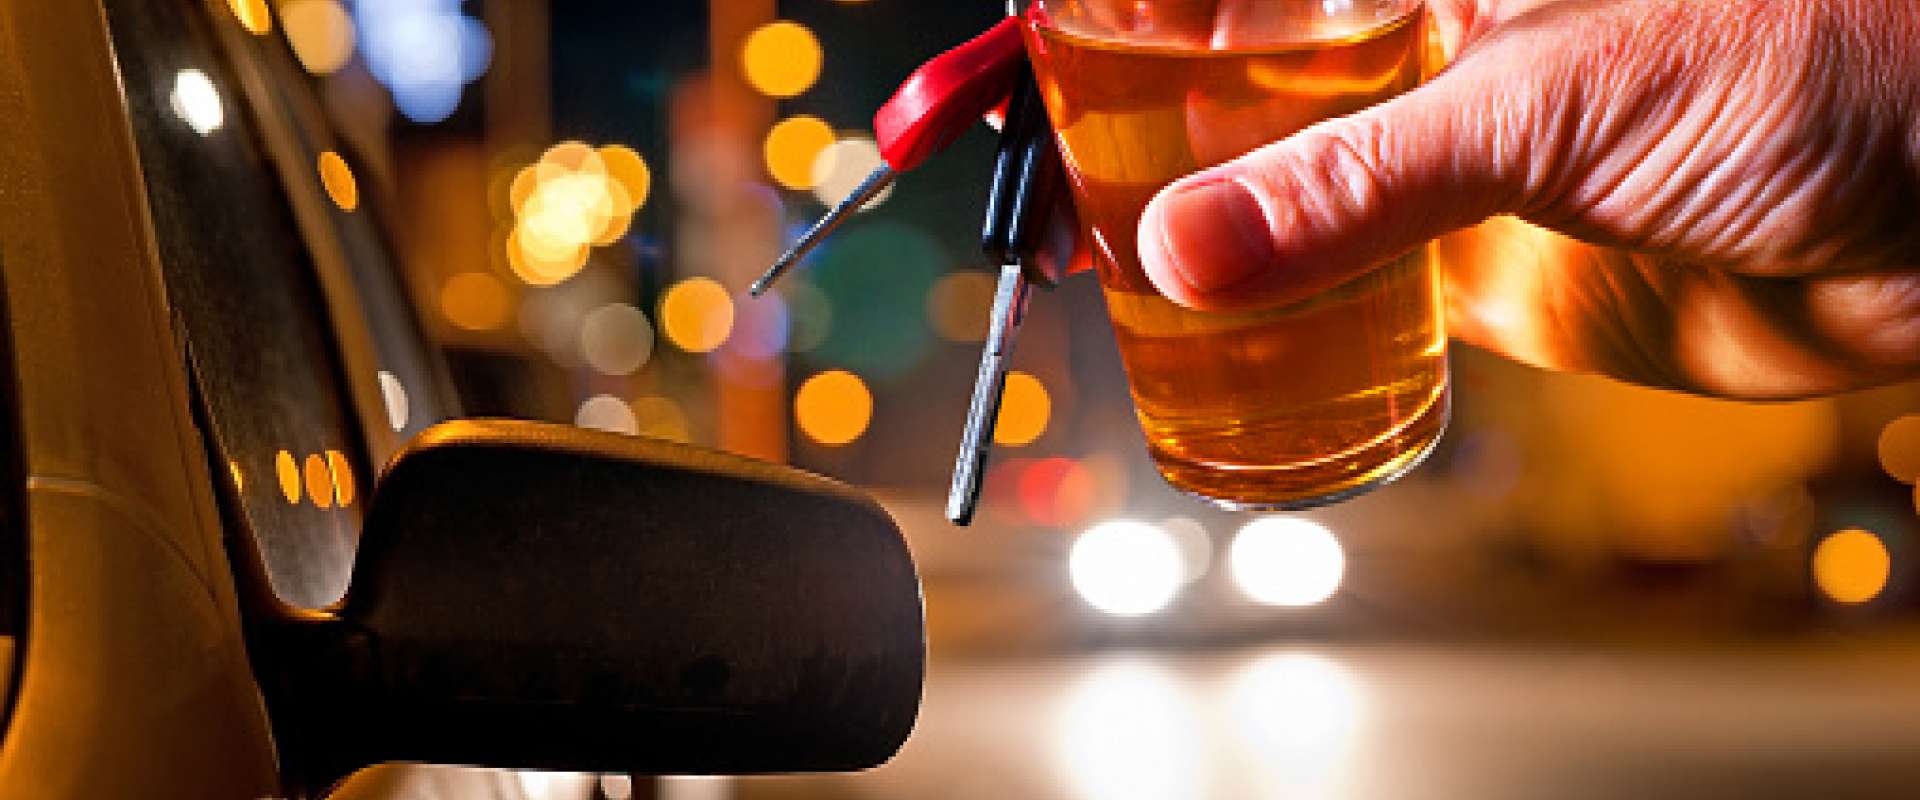 Low Range Drink Driving Offence - Now What?